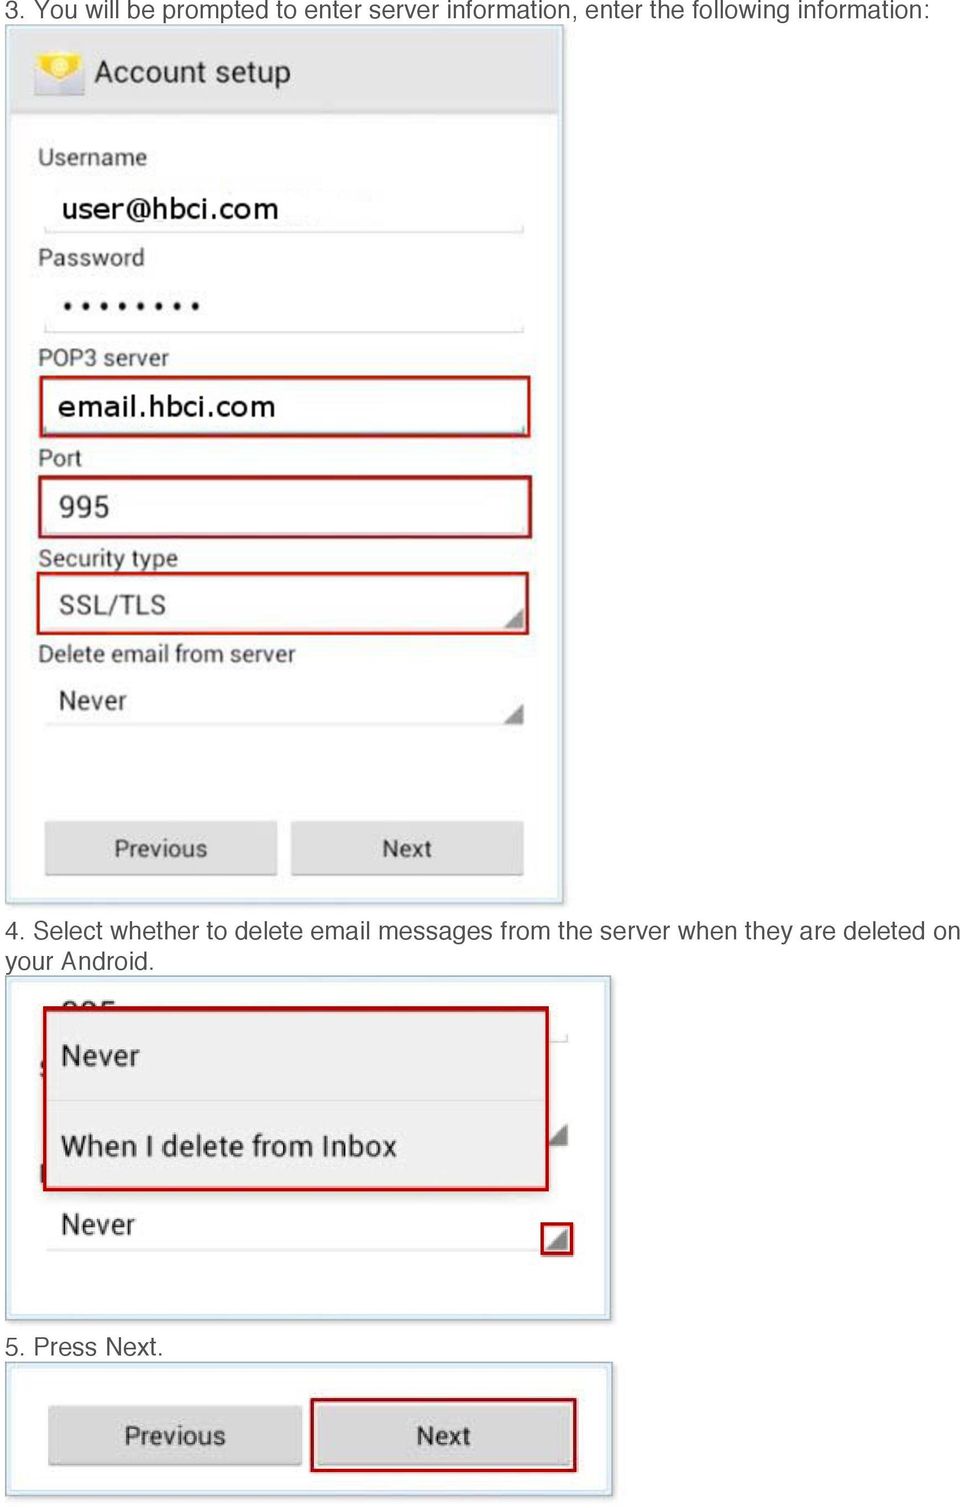 Select whether to delete email messages from the